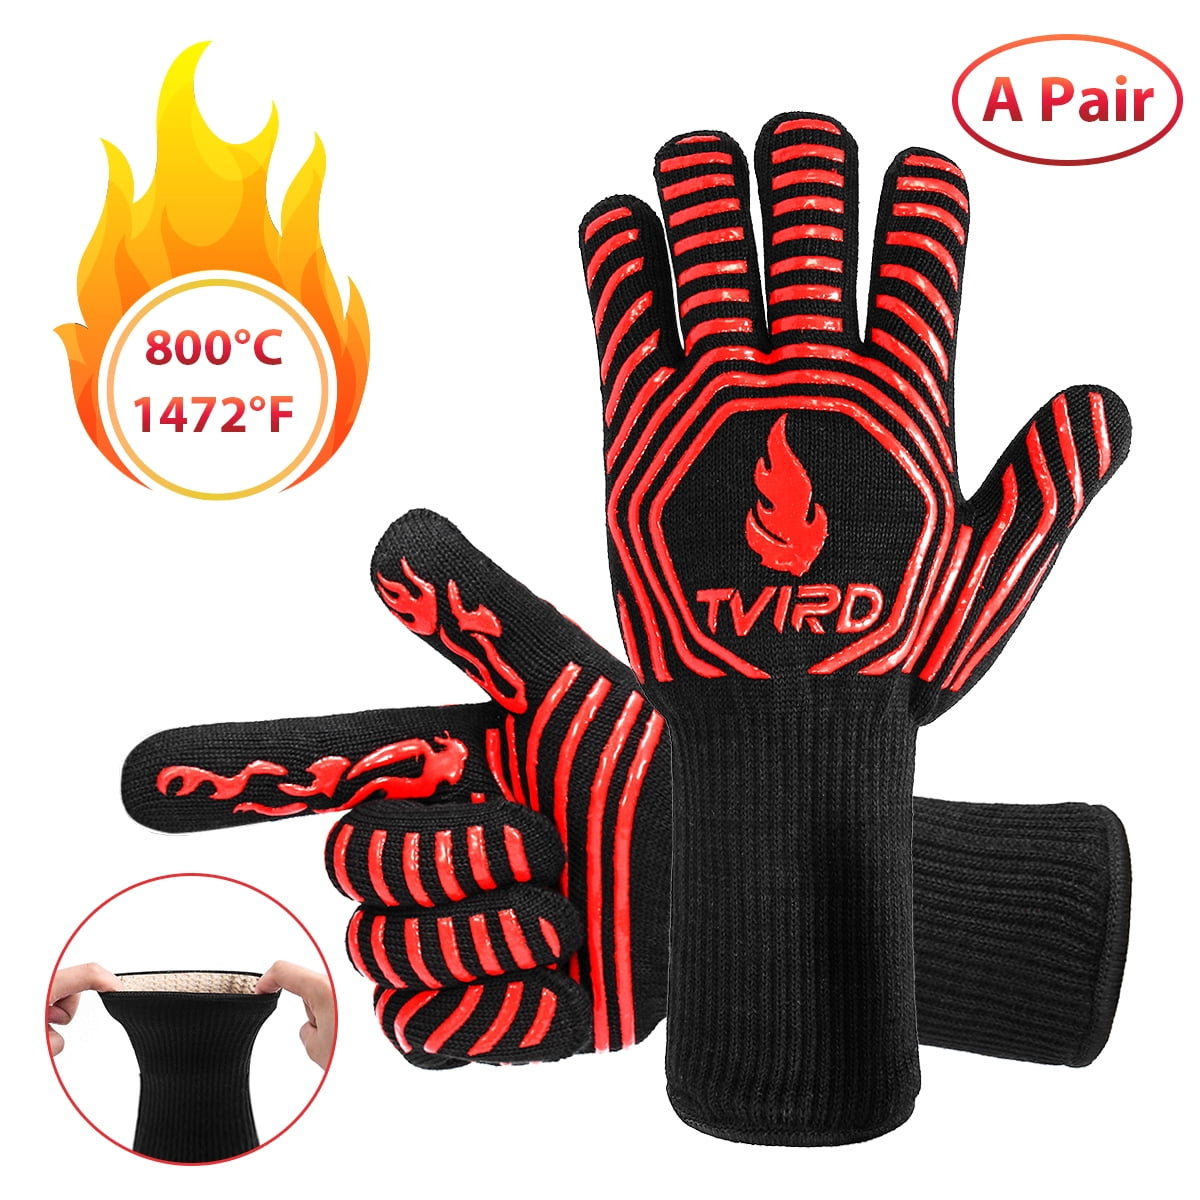 1 Pair 1472℉ Extreme Heat Resistant Glove BBQ Grilling Cooking Oven Gloves Mitts 